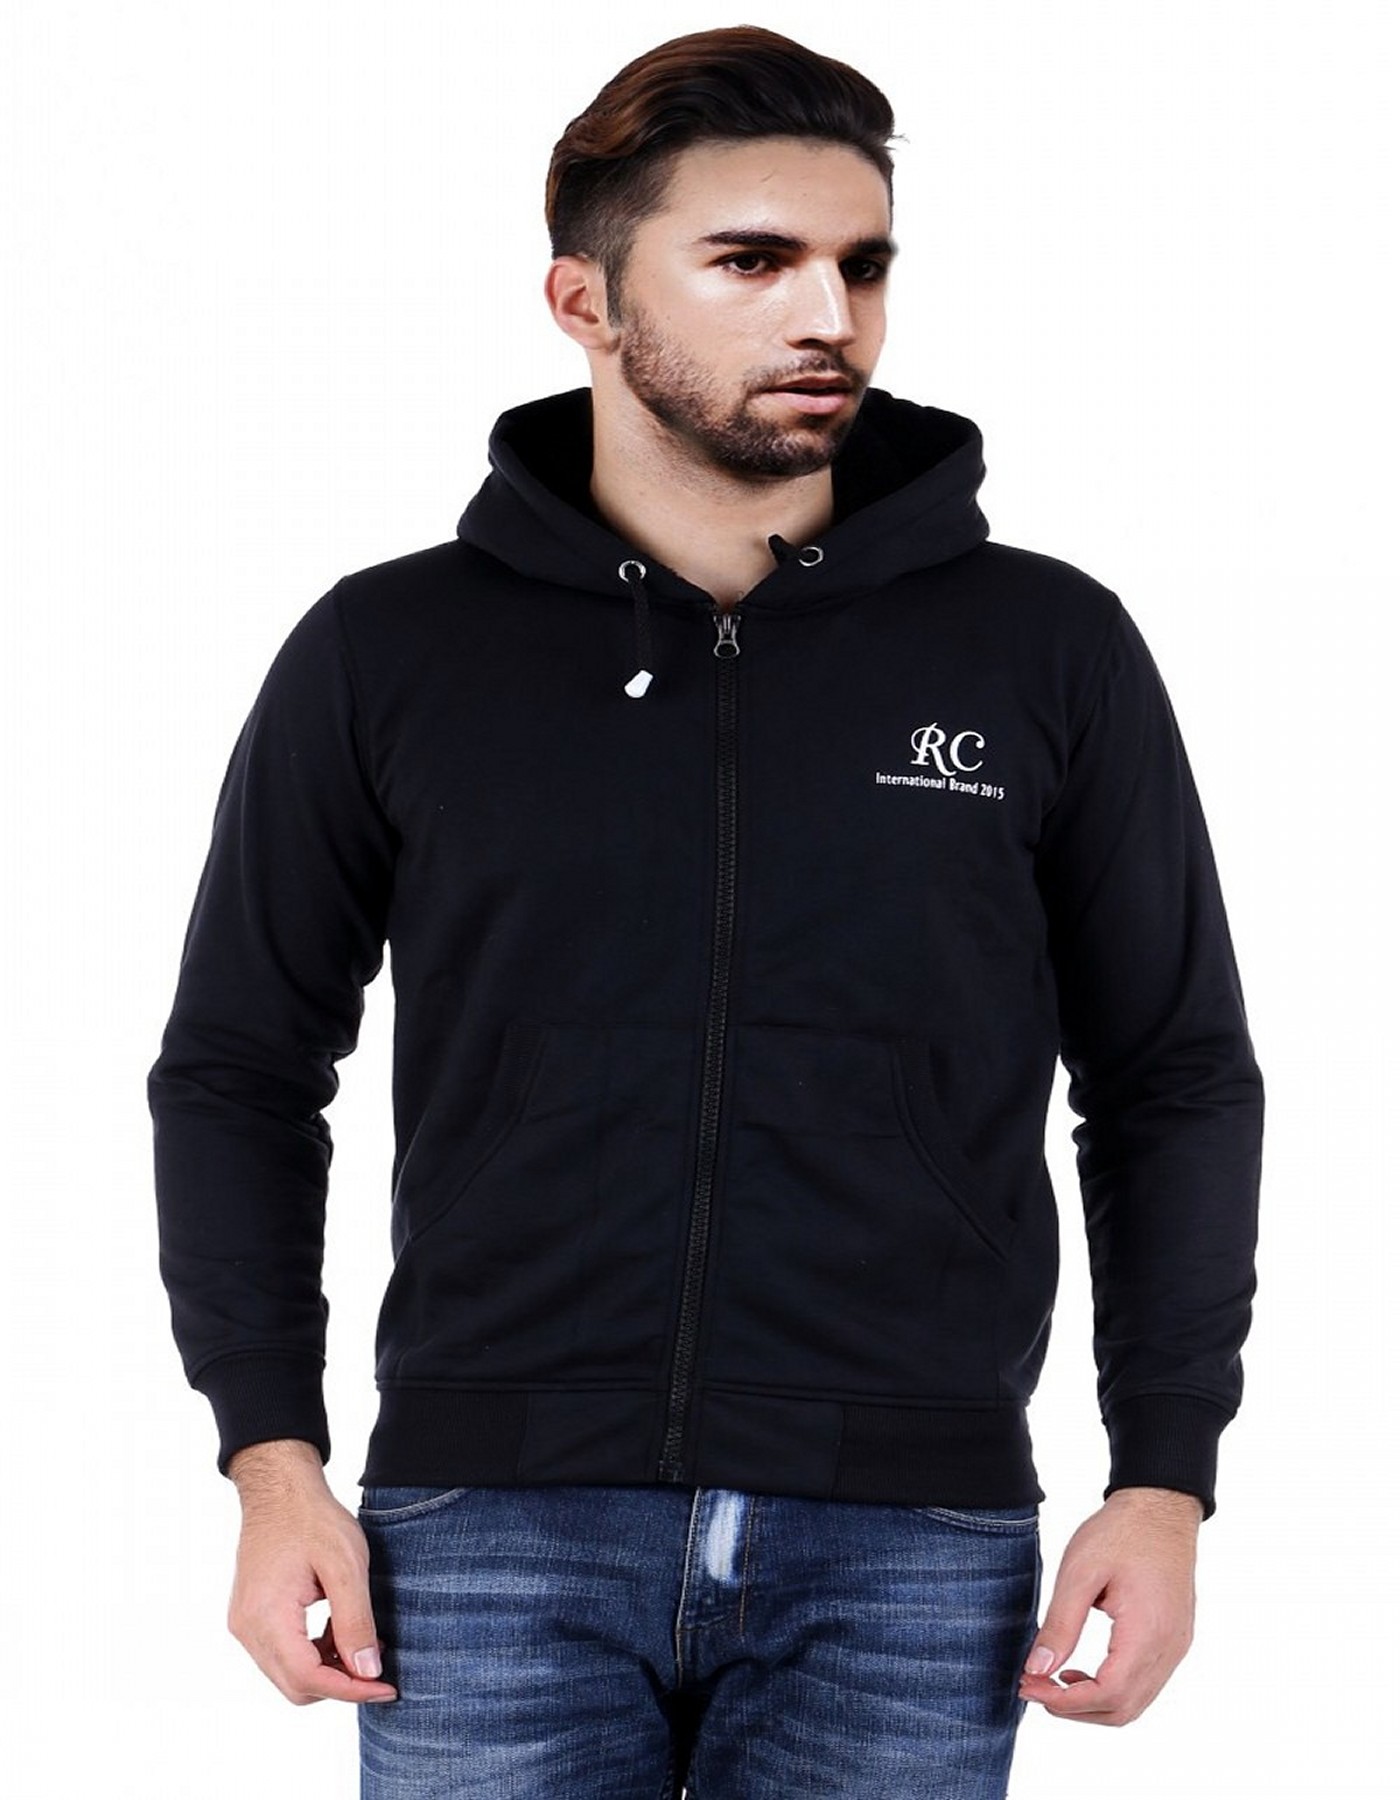 Buy Christy World Solid Men'S Jackets Online @ ₹649 from ShopClues